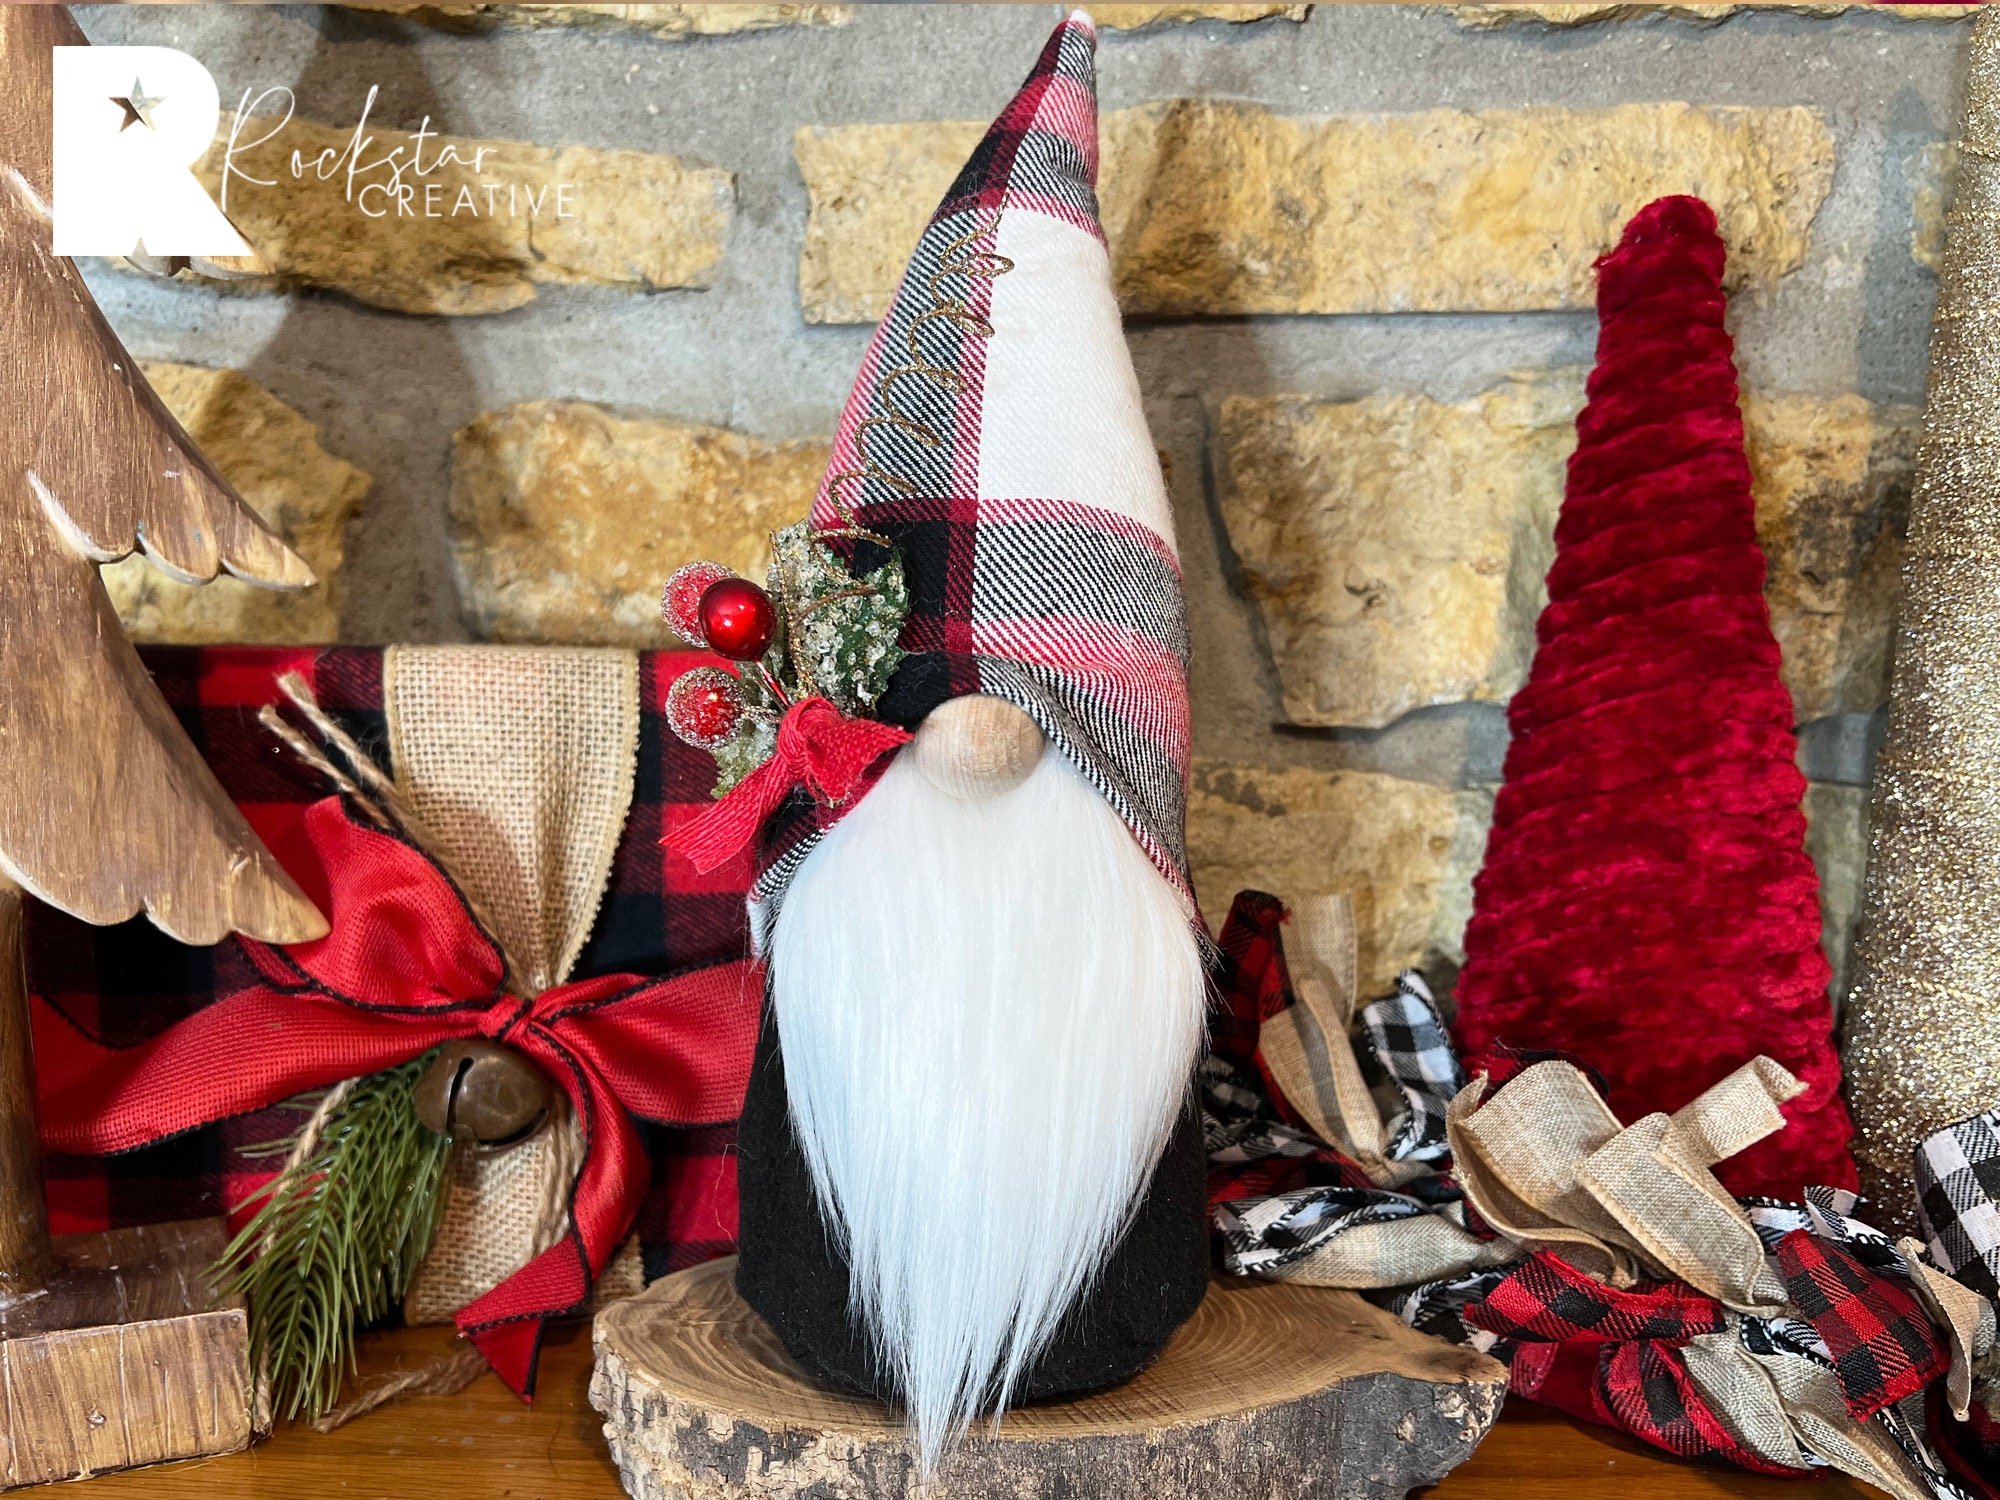 Buy: Folk Holiday Gnome Winter Art Not Personalized